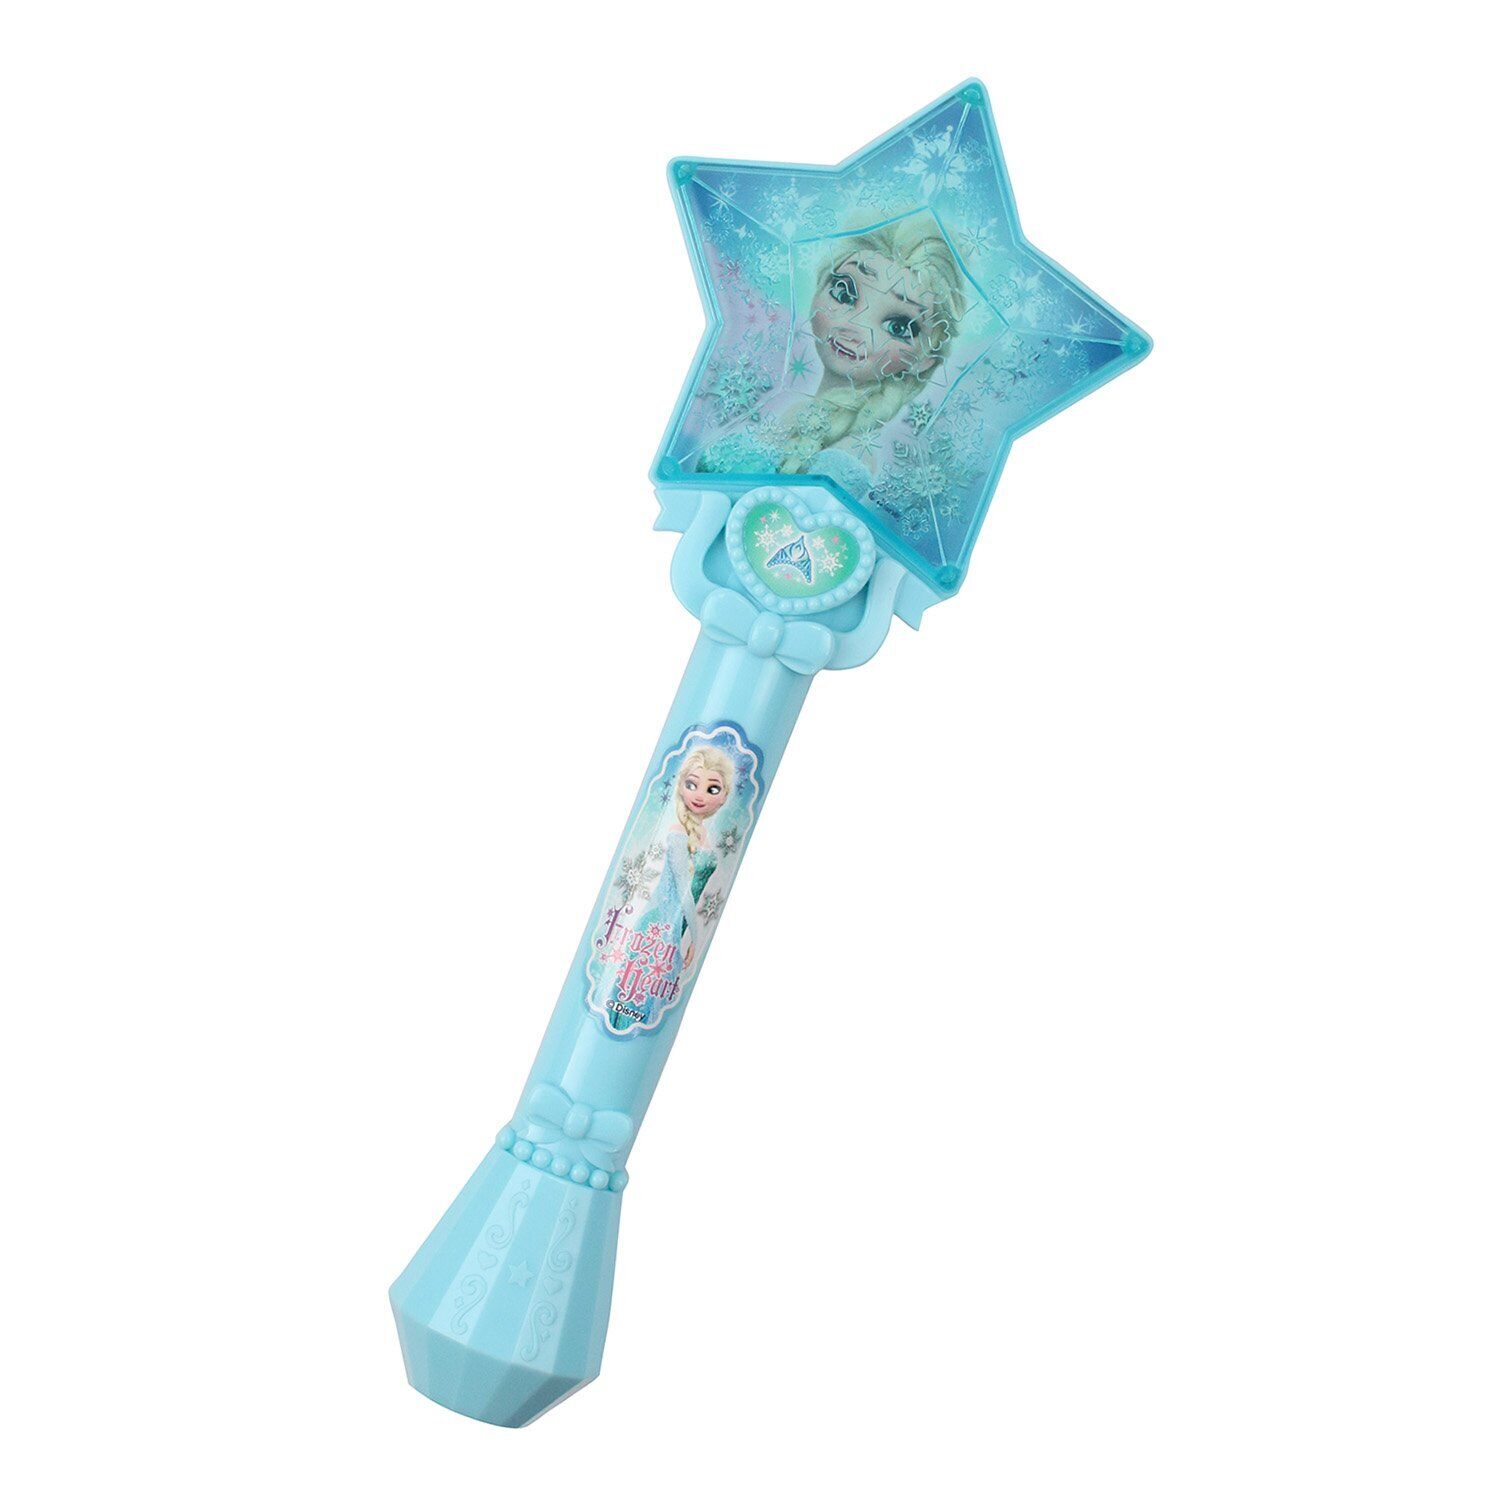 Maruka Frozen Magical Wand ~Elsa~ Toy Accessory for ages 3 and up 180964